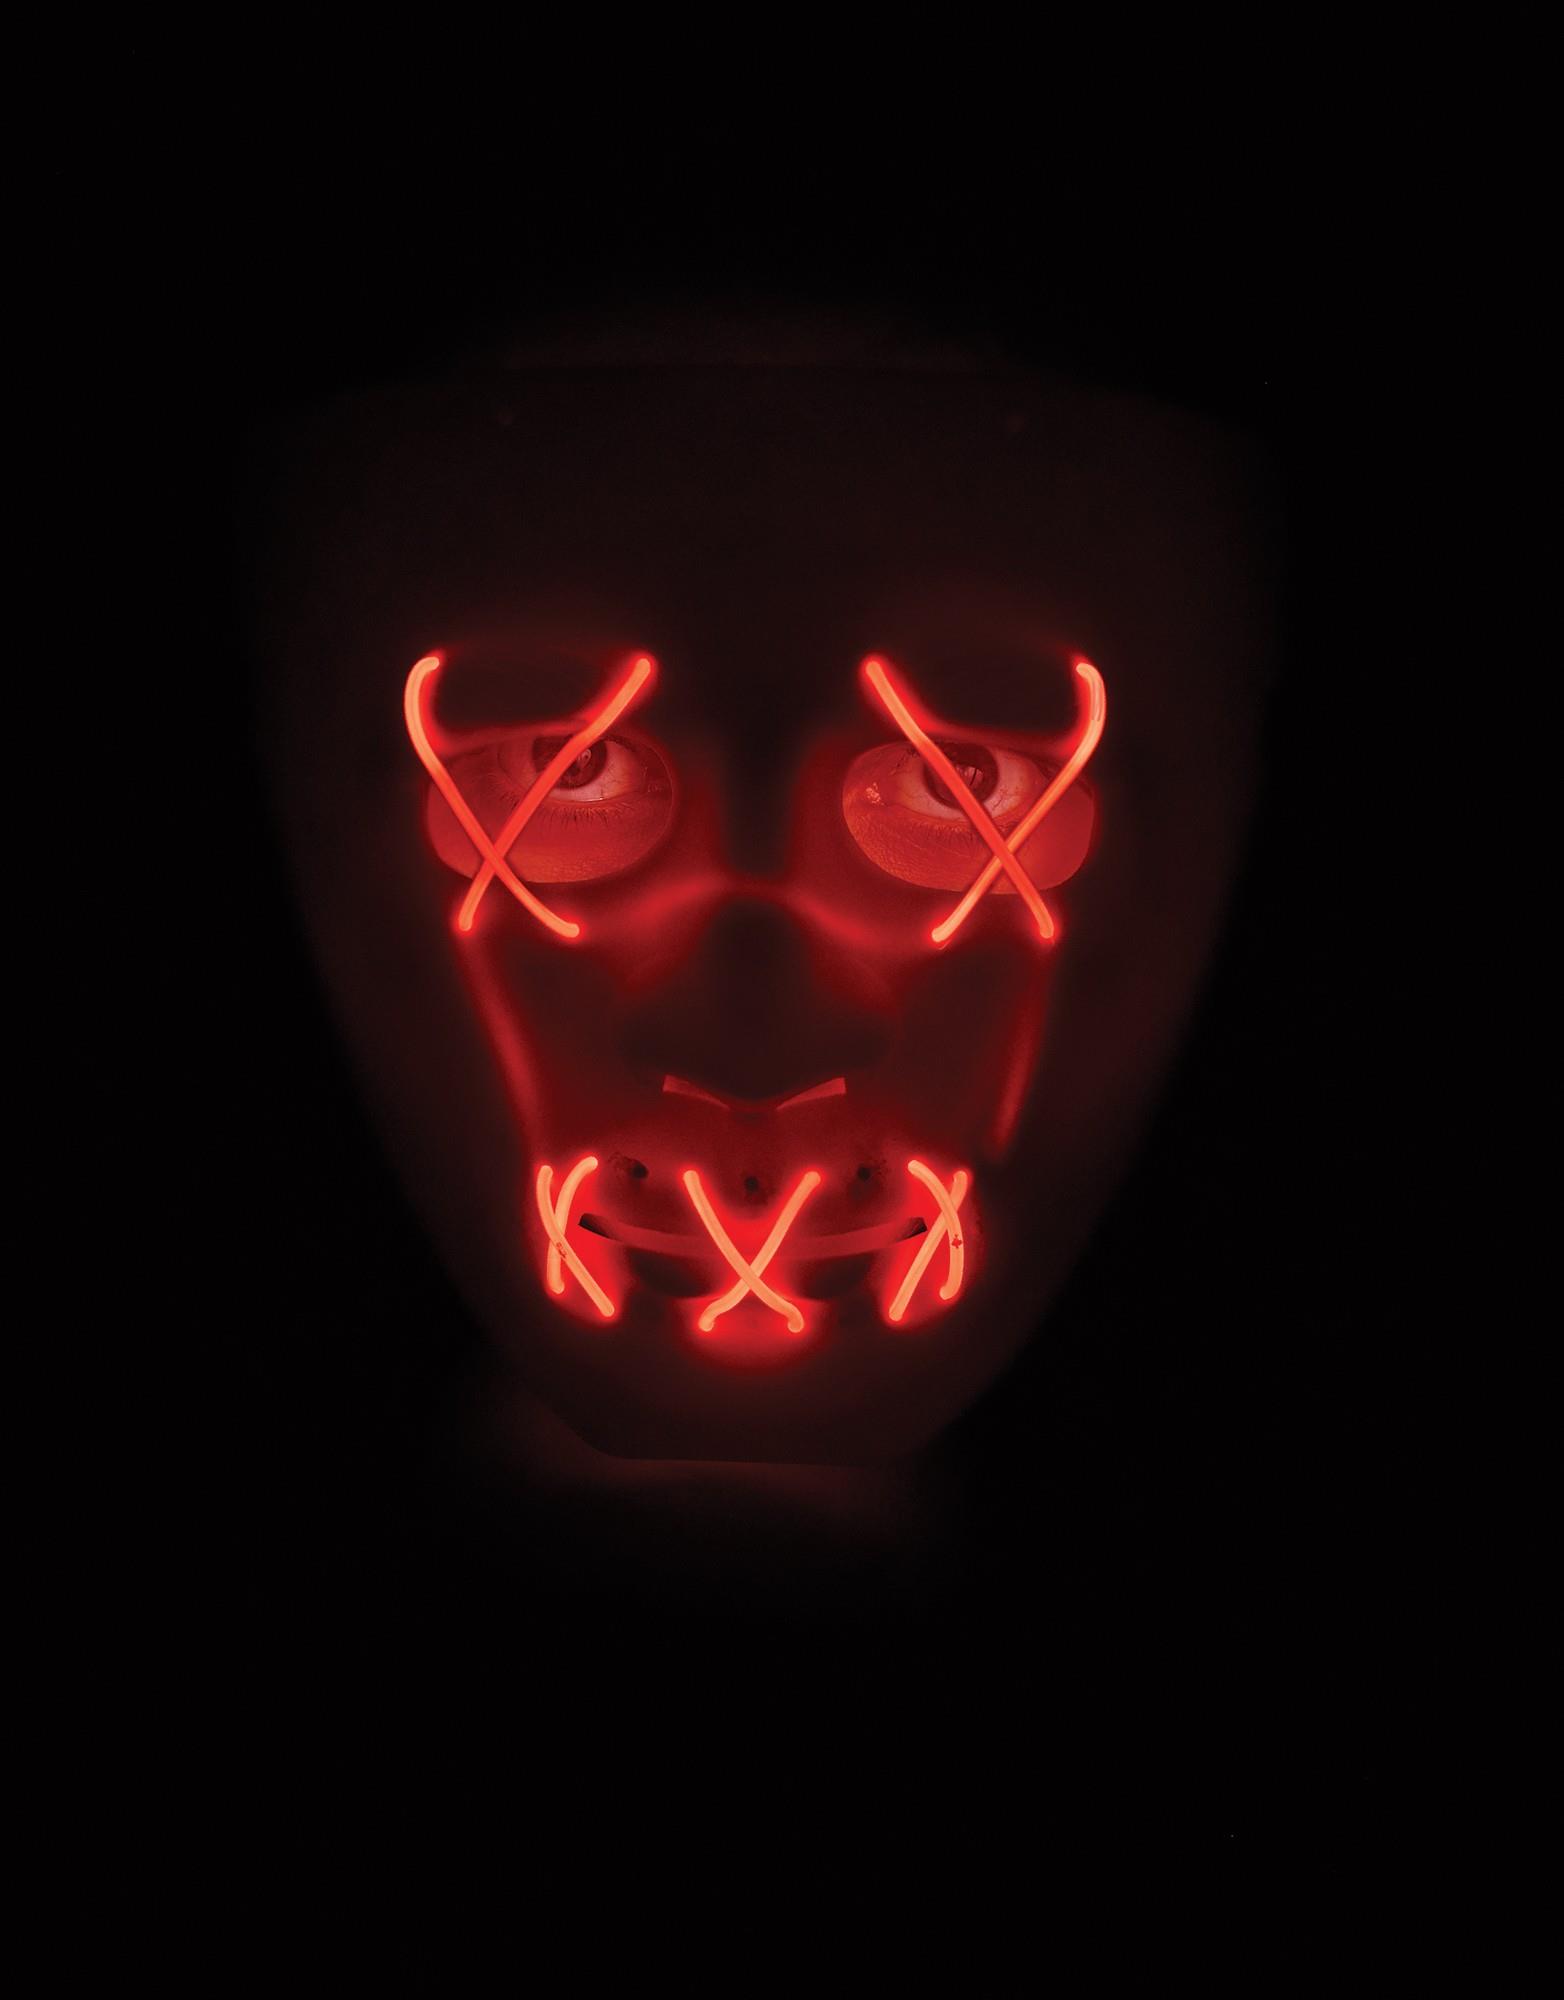 Scary Glowing Light up Purge Mask White Face with Glowing Red Wire | eBay